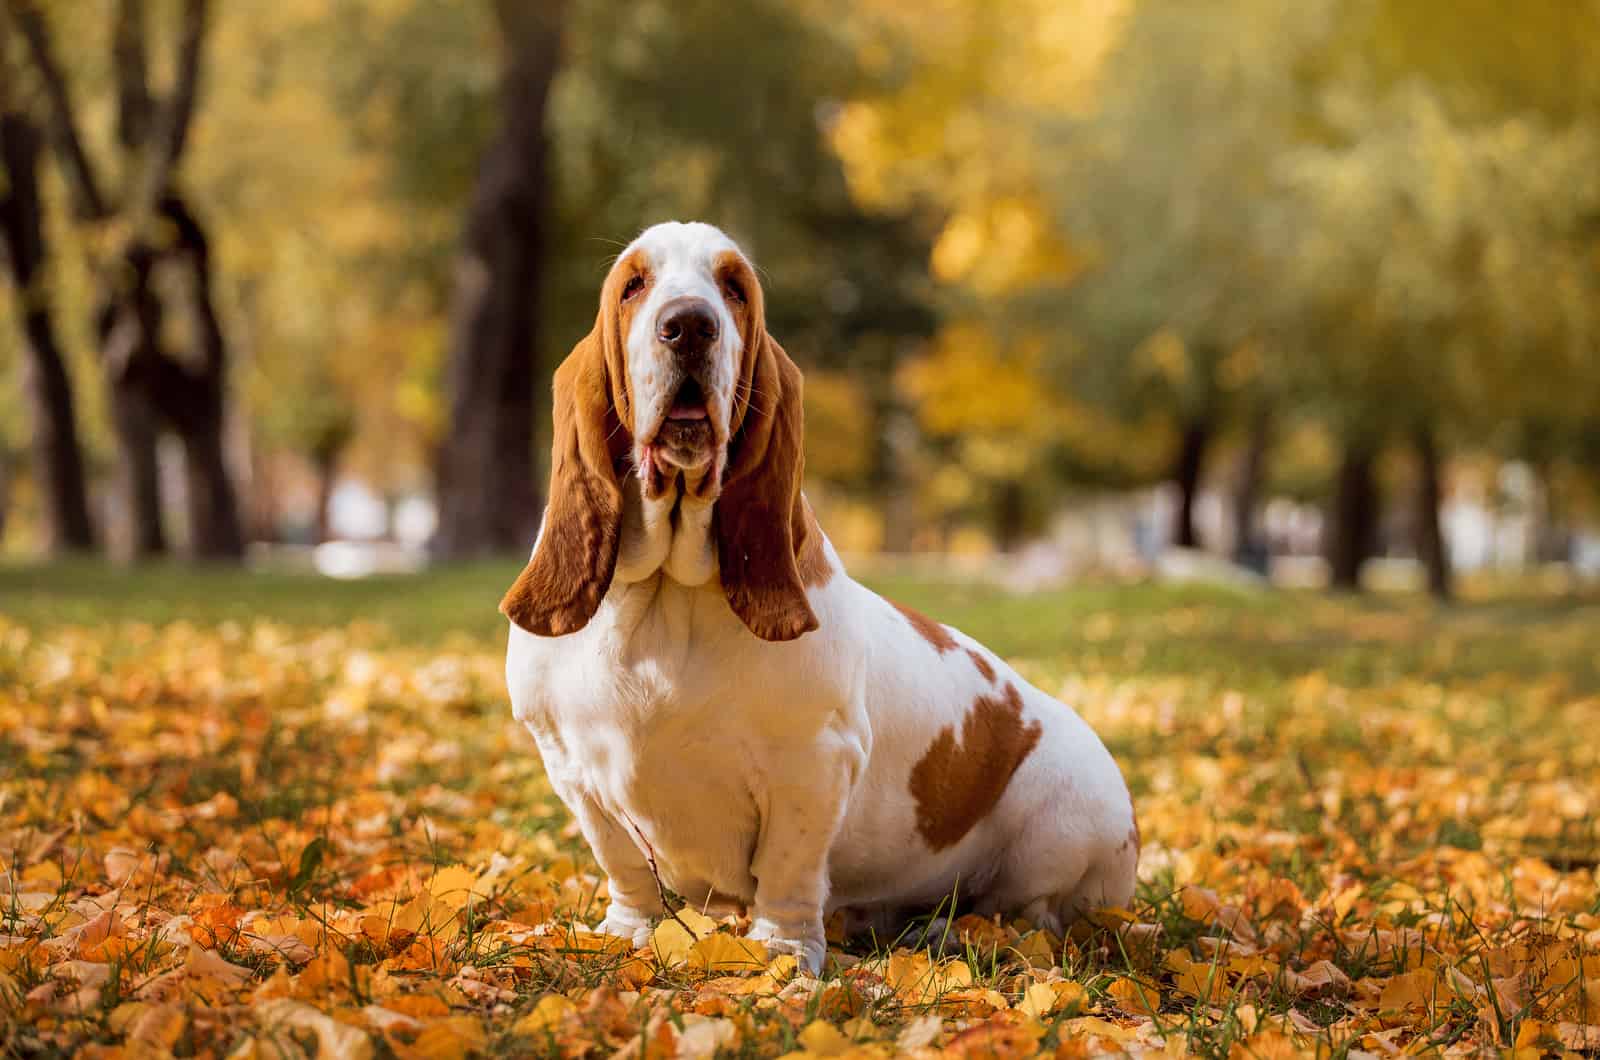 basset hound surrounded by autumn leaves